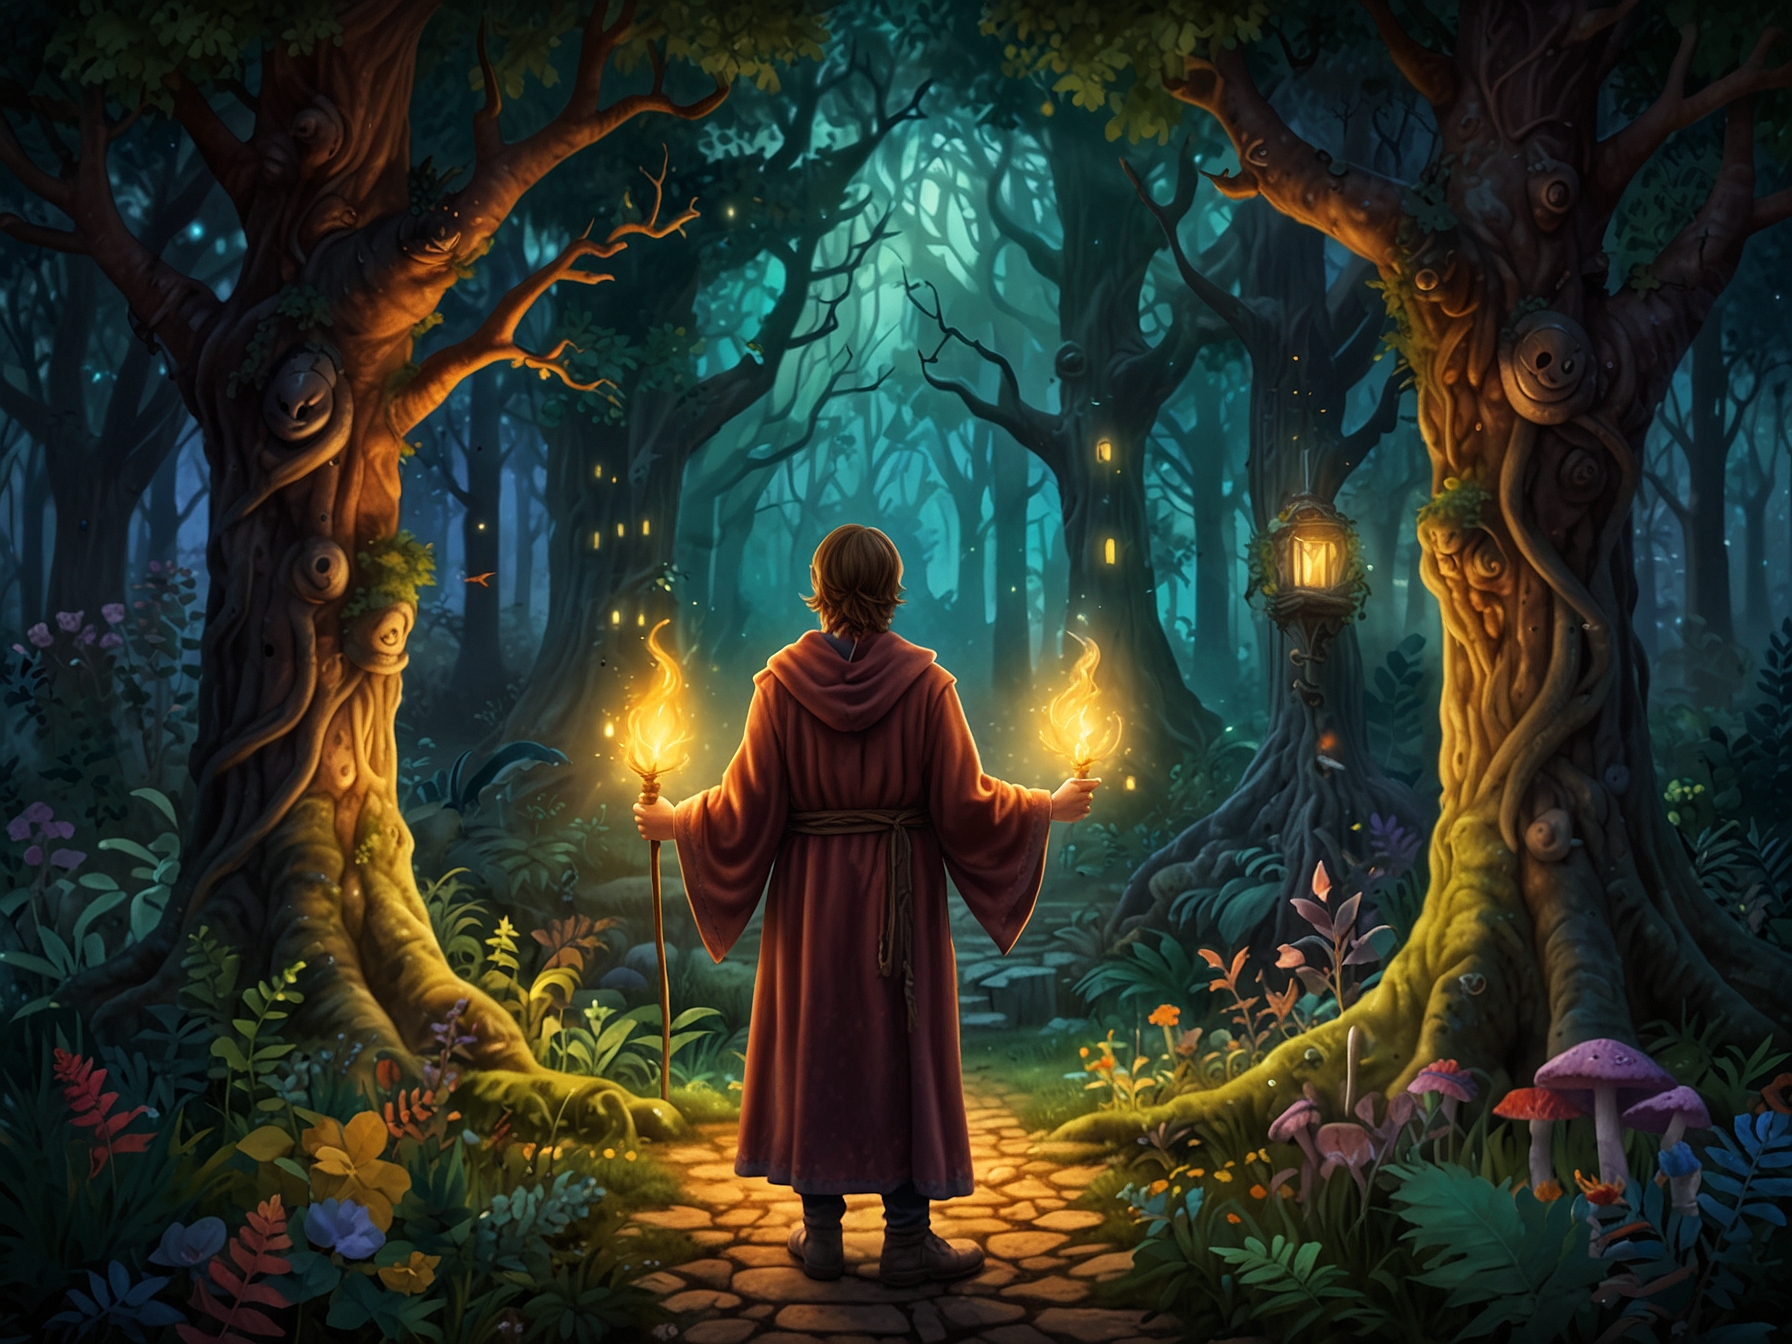 An illustration of 'Mystical Realms: Enchanted Forest' showcasing a young sorcerer in a vibrant, magical forest filled with mythical creatures and intricate puzzles.